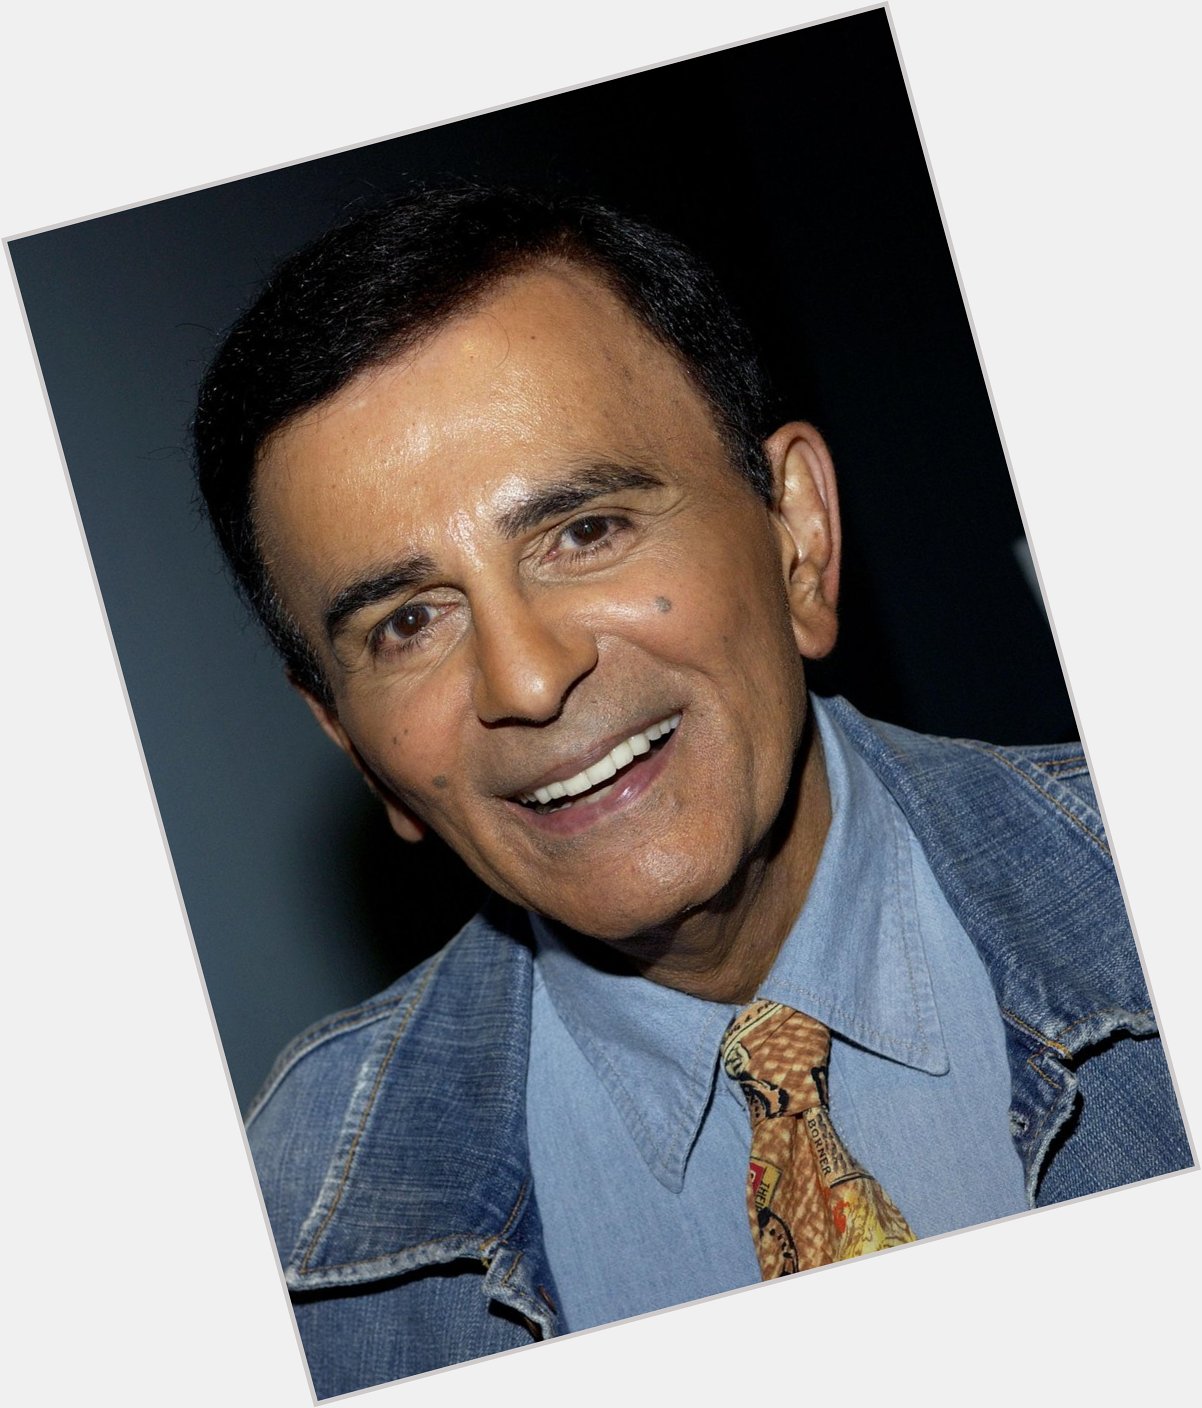 Happy Birthday, to the late Casey Kasem
For Disney, he voiced DJ Despicable in the Disney TV series, 